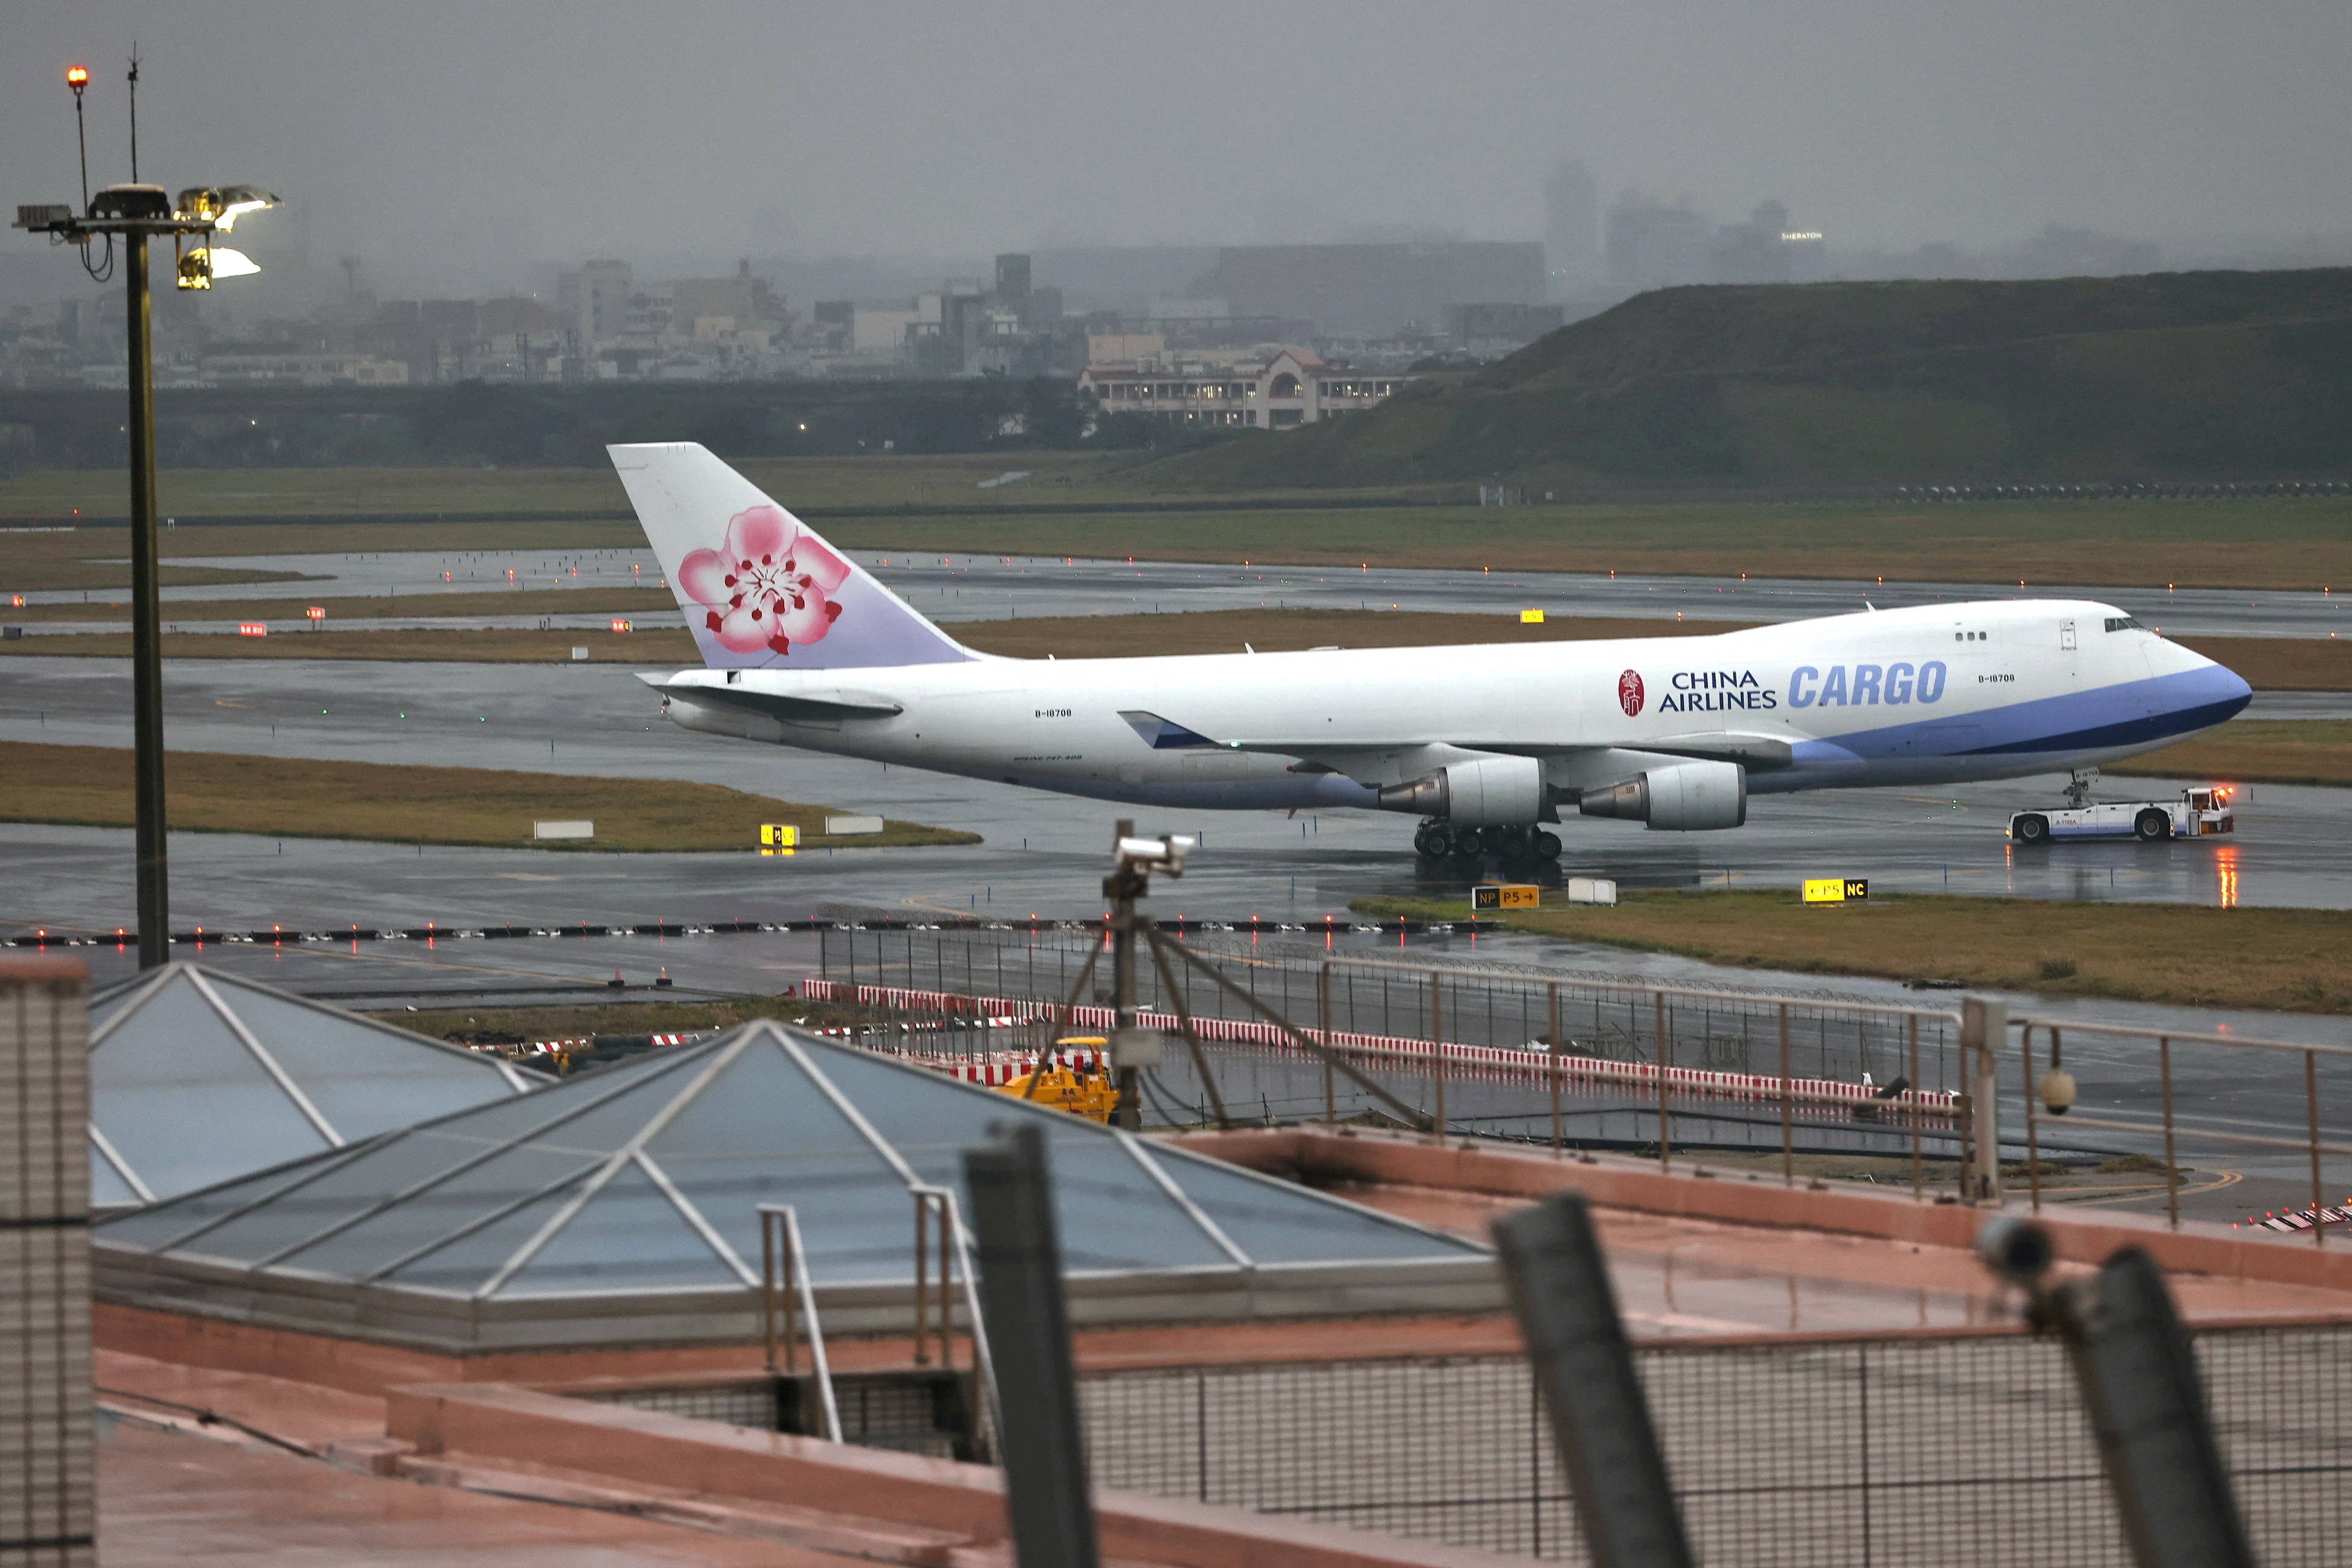 China Airlines Cargo plane taxis at the Taiwan Taoyuan International Airport in Taoyuan